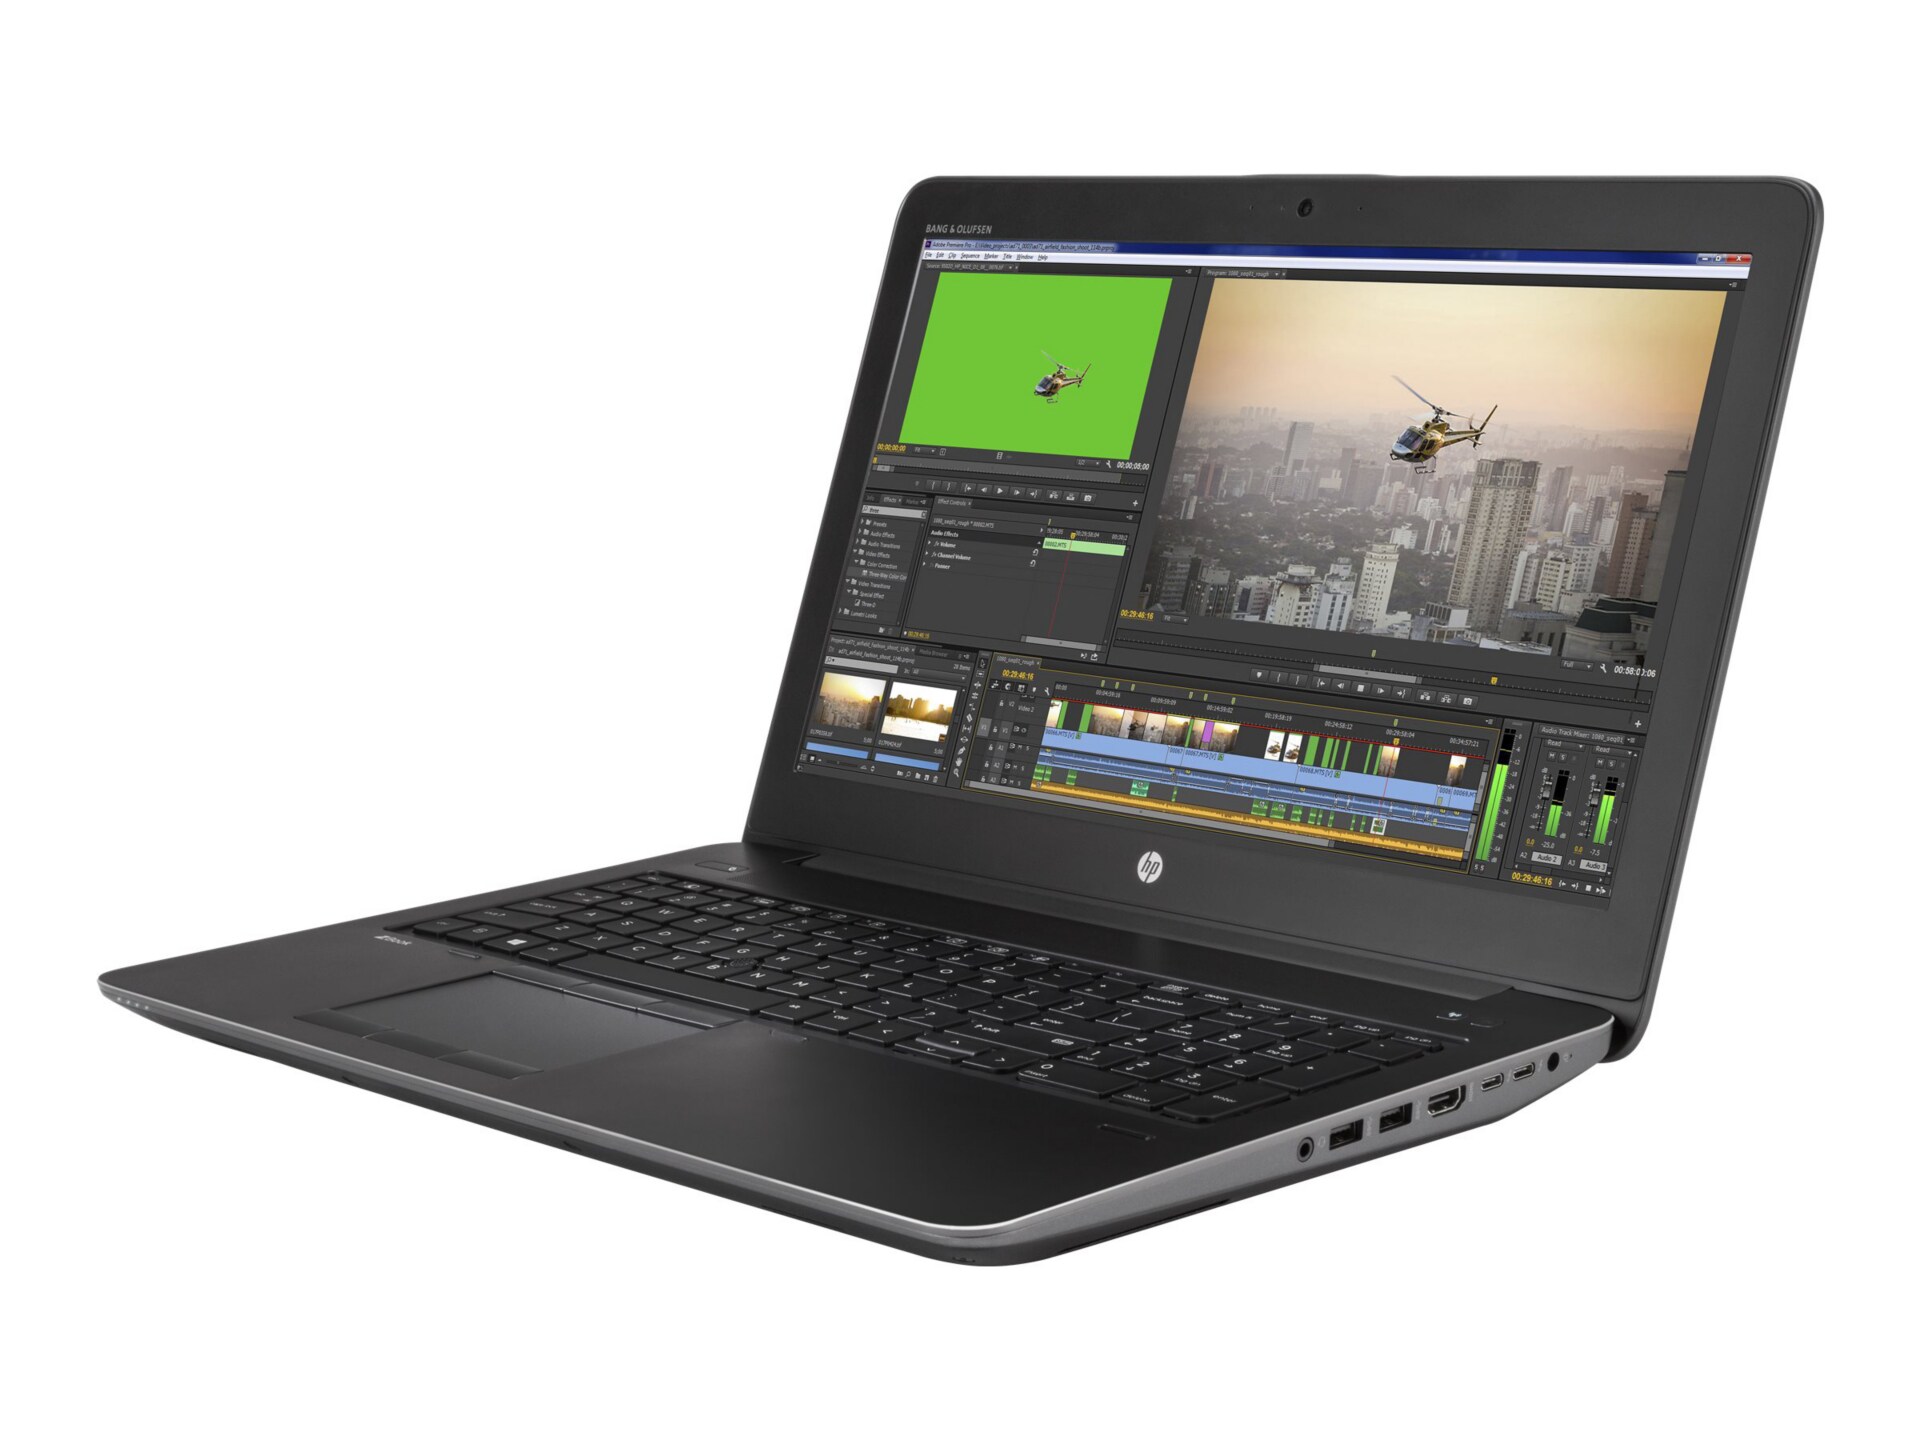 HP ZBook 15 G3 Mobile Workstation - 15.6" - Core i7 6700HQ - 32 GB RAM - 512 GB SSD - US